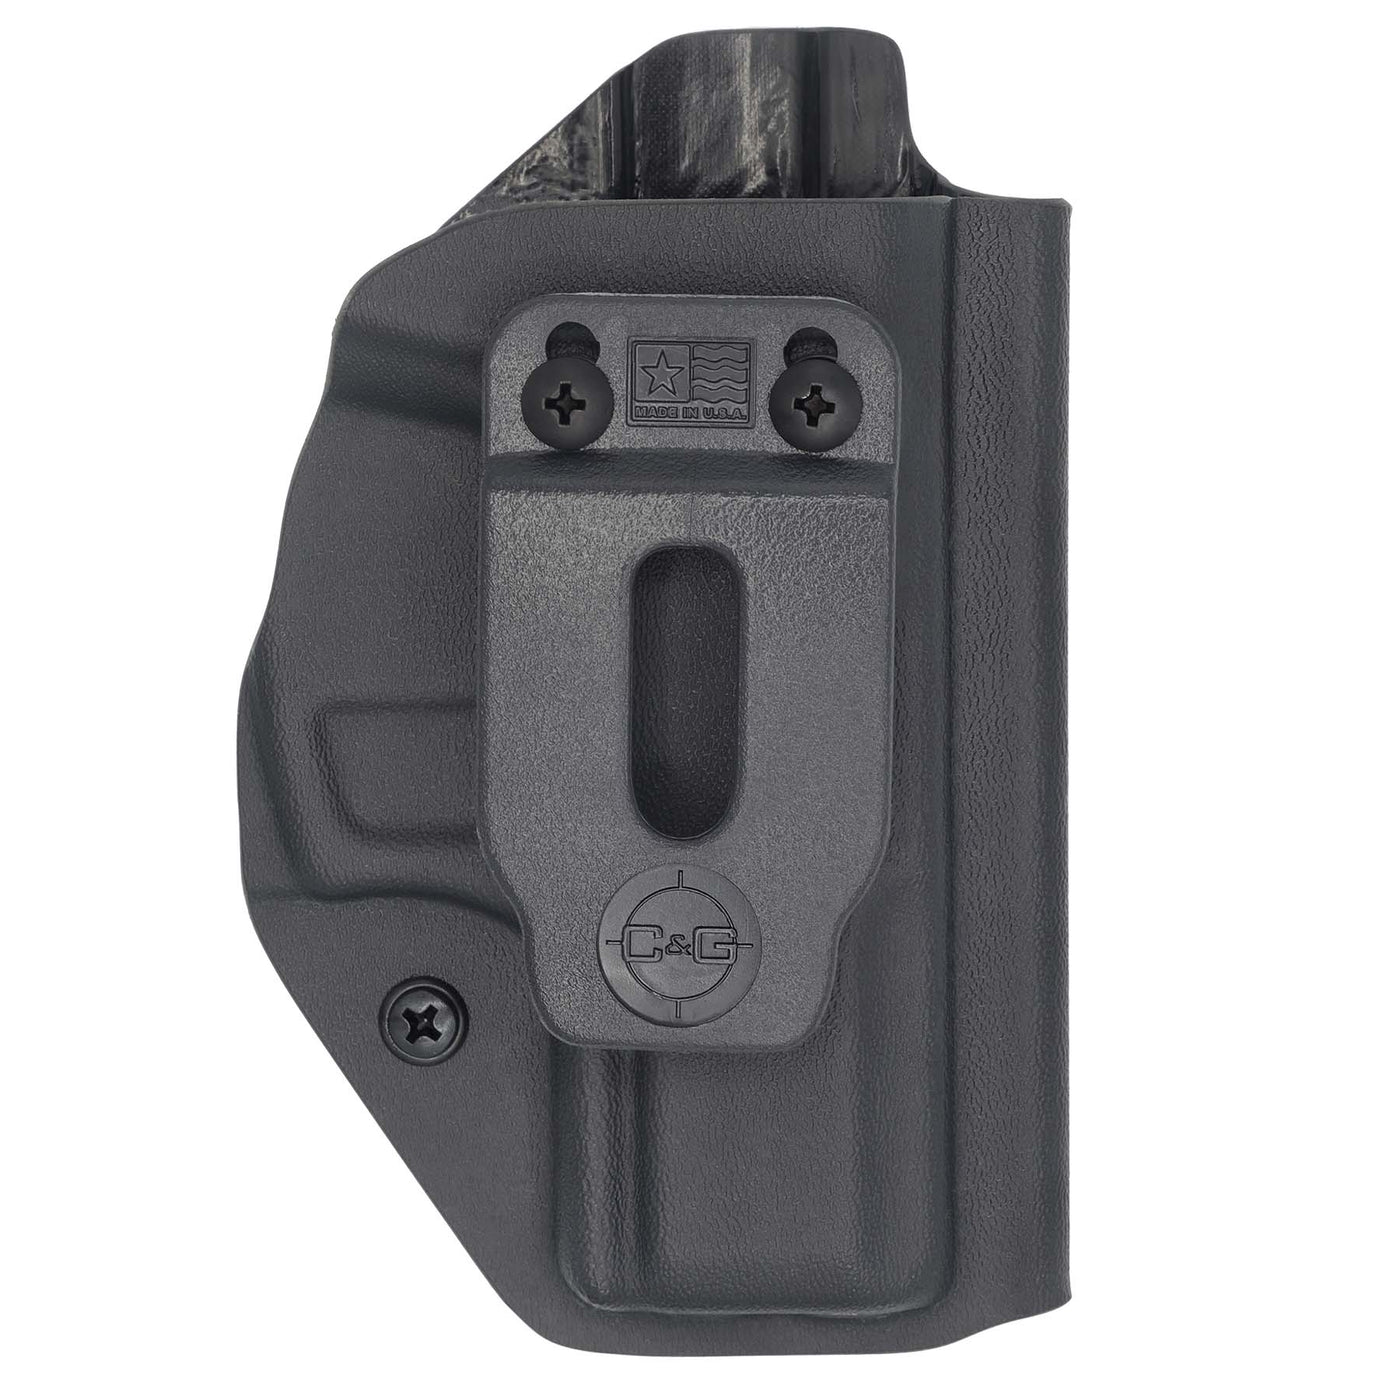 C&G Holsters IWB inside the waistband Holster for the Taurus G2C